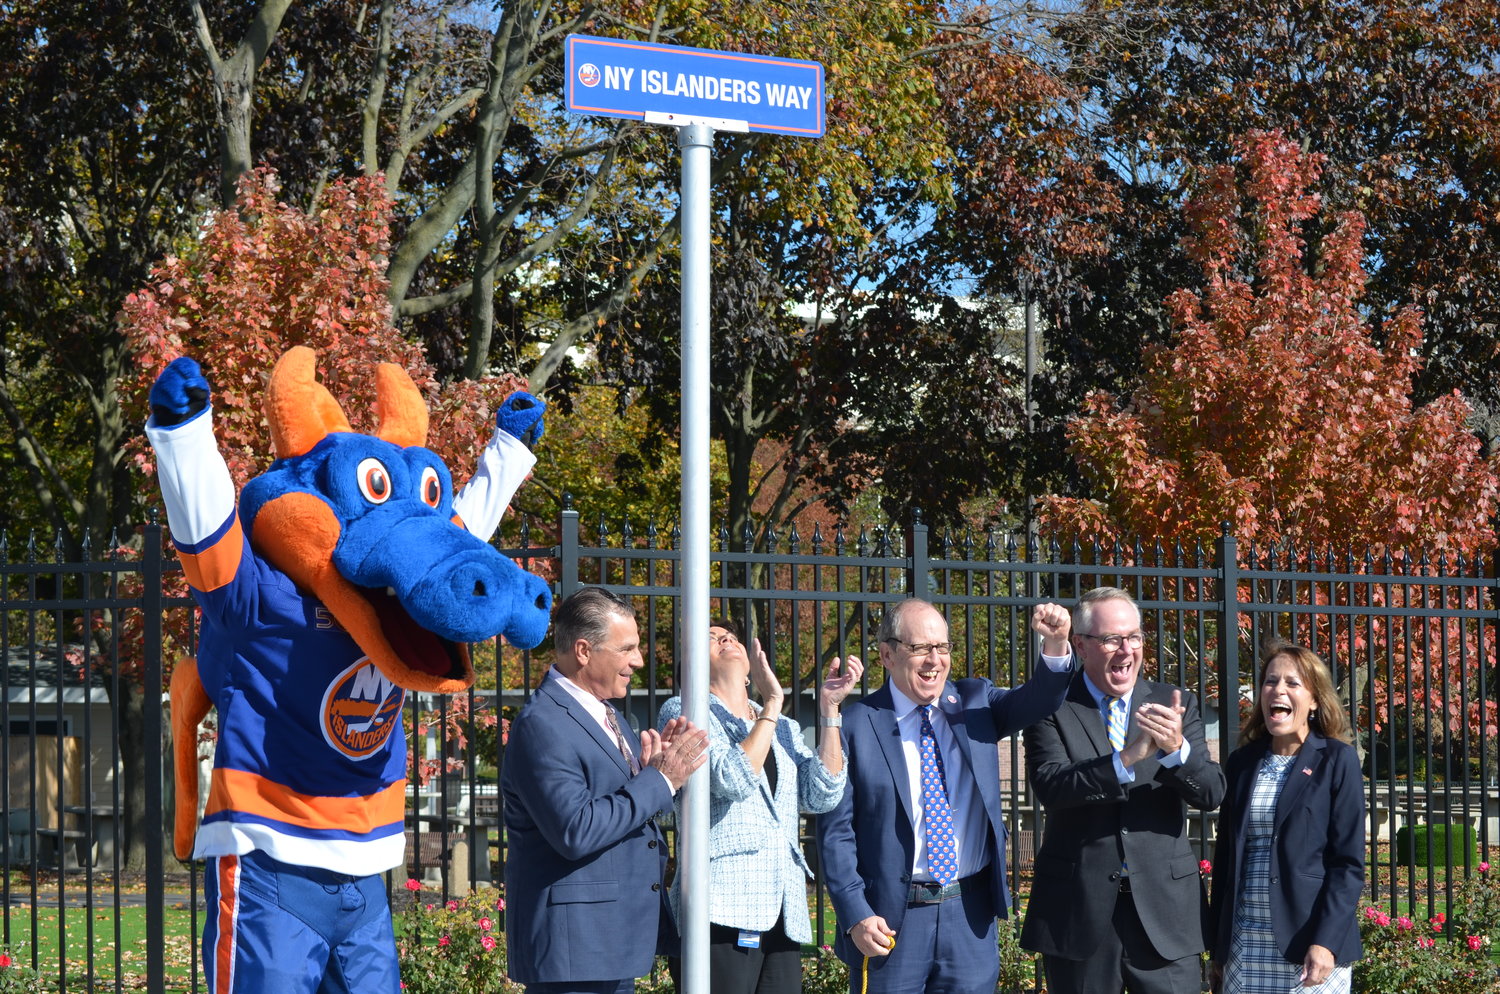 Coming together to unveil the new street sign, with the help of Islanders mascot Sparky the dragon, were Islanders co-owner Ledecky and Hempstead Town Supervisor Don Clavin, third and second from right.